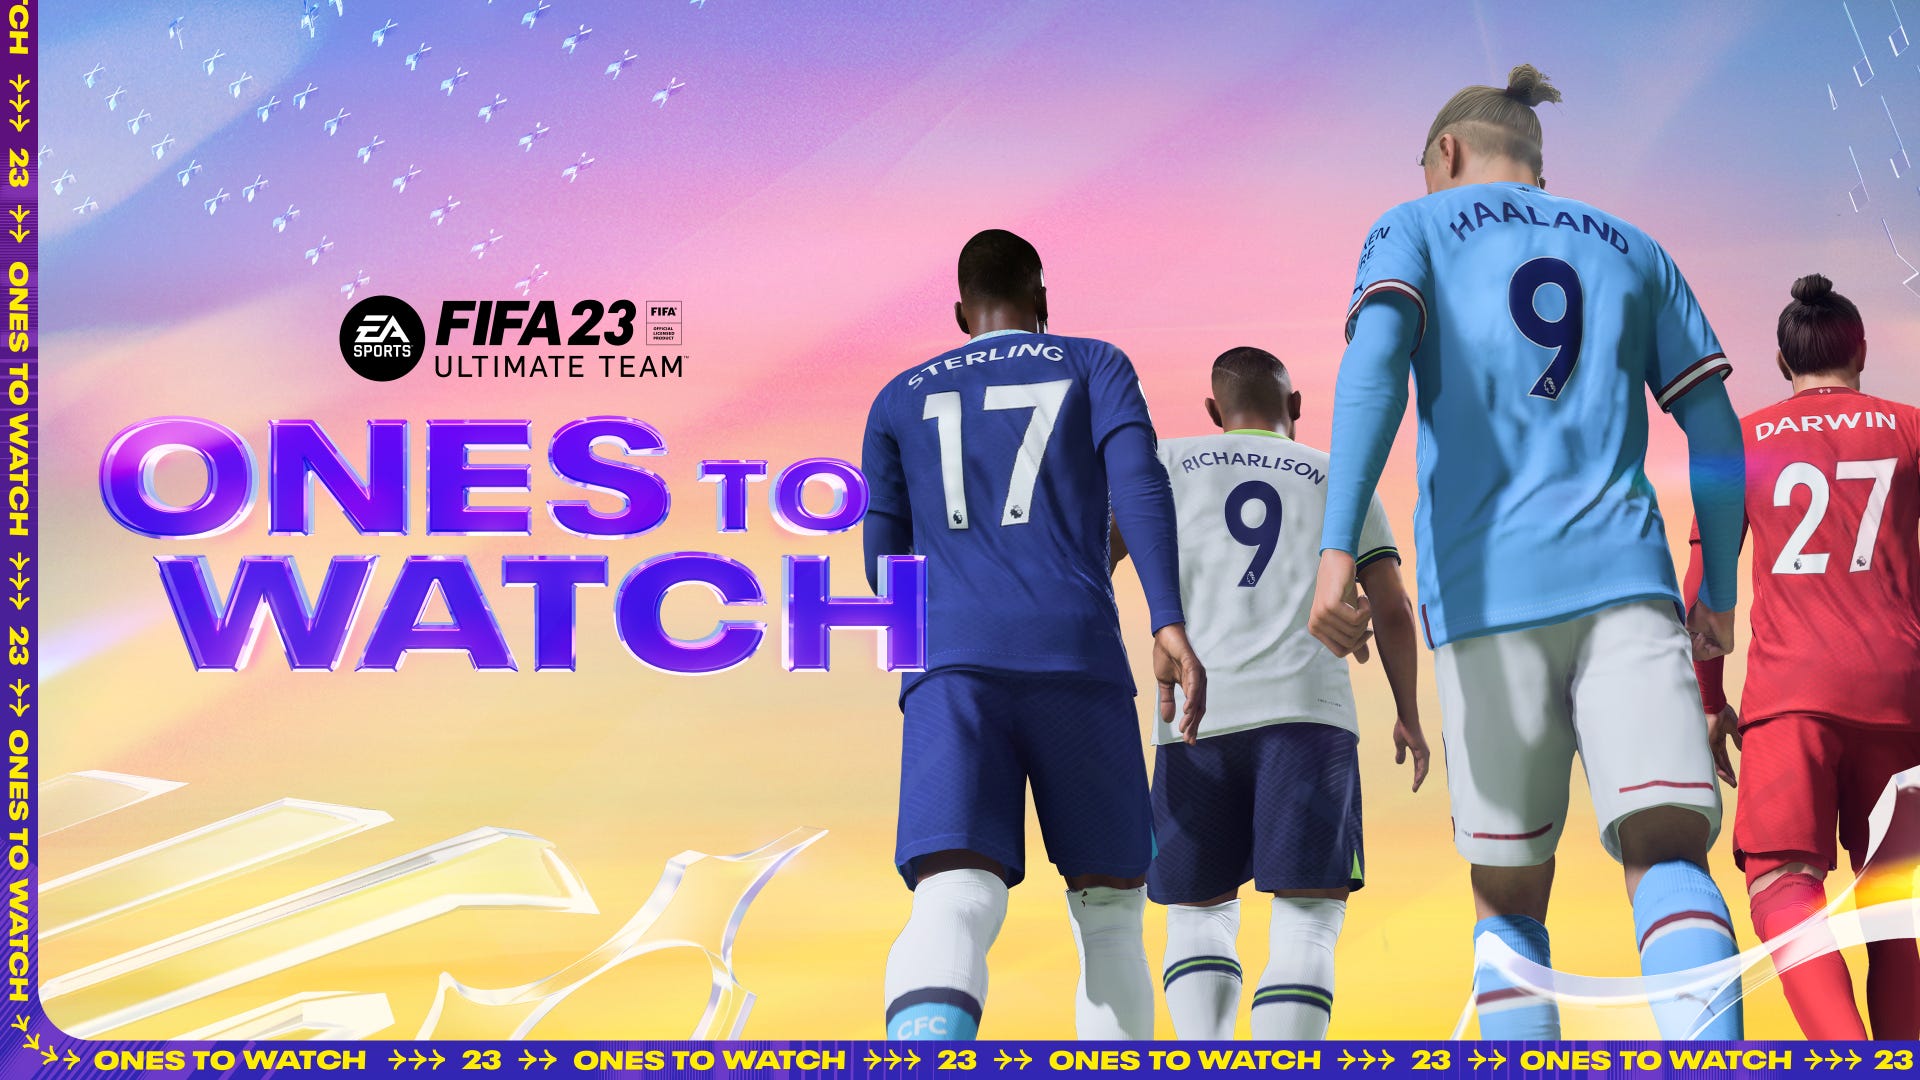 FIFA 23 Ultimate Team Ones to Watch